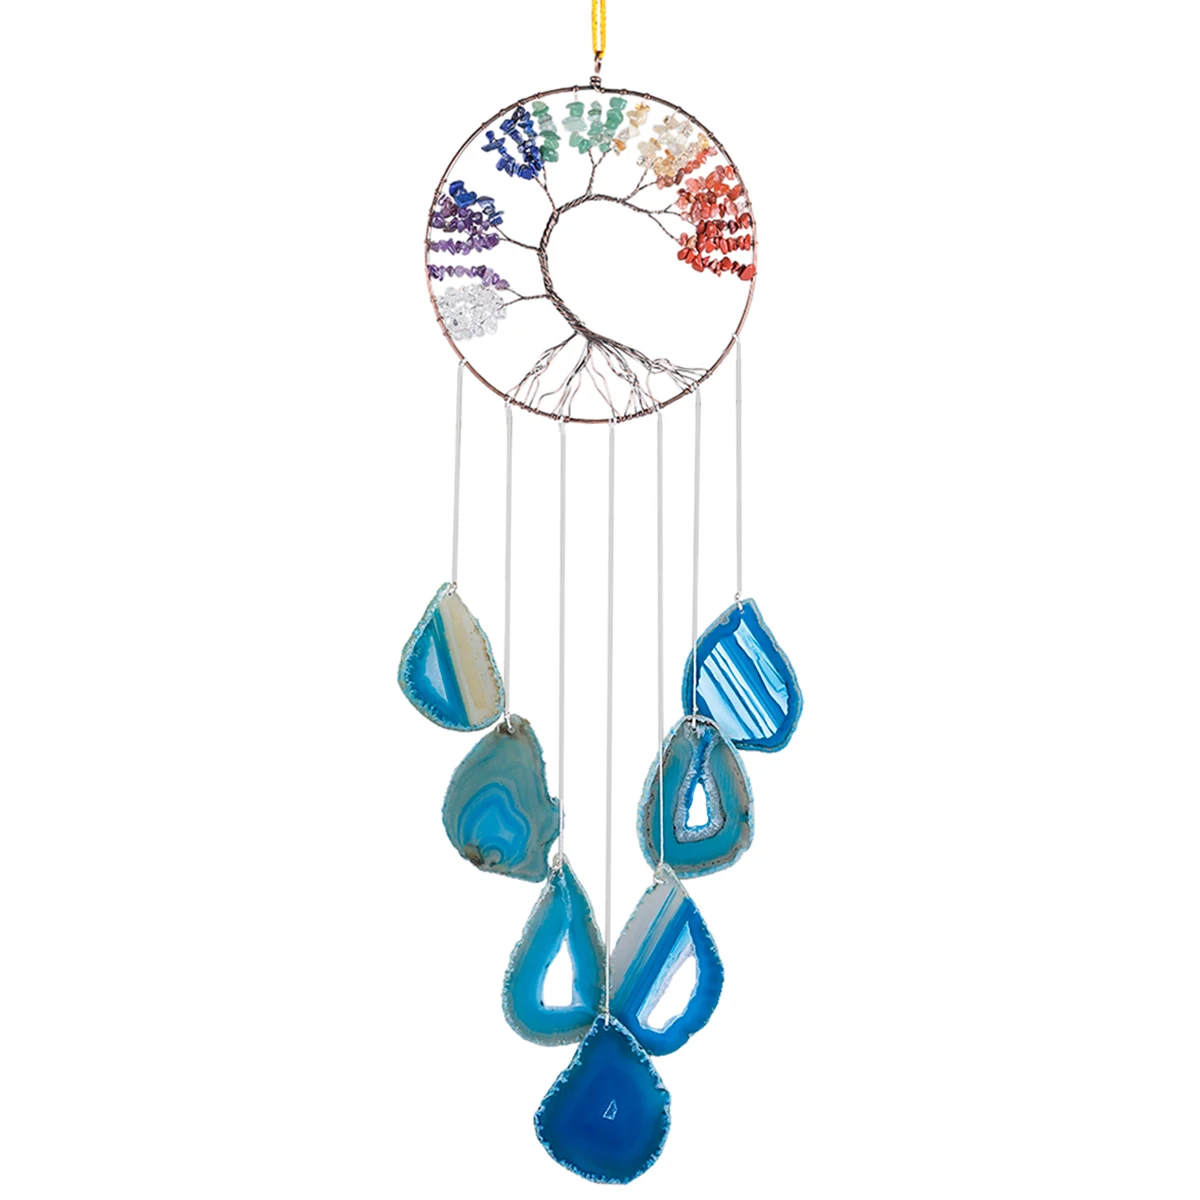 Natural Crystal Stone Wind Chime Tree Of Life 7 Chakra Healing Slices Agate Handmade Wall Hanging Ornaments Home Decoration Gift healing raw amethyst crystal calla lily with natural rose quartz base for desktop ornaments home decoration